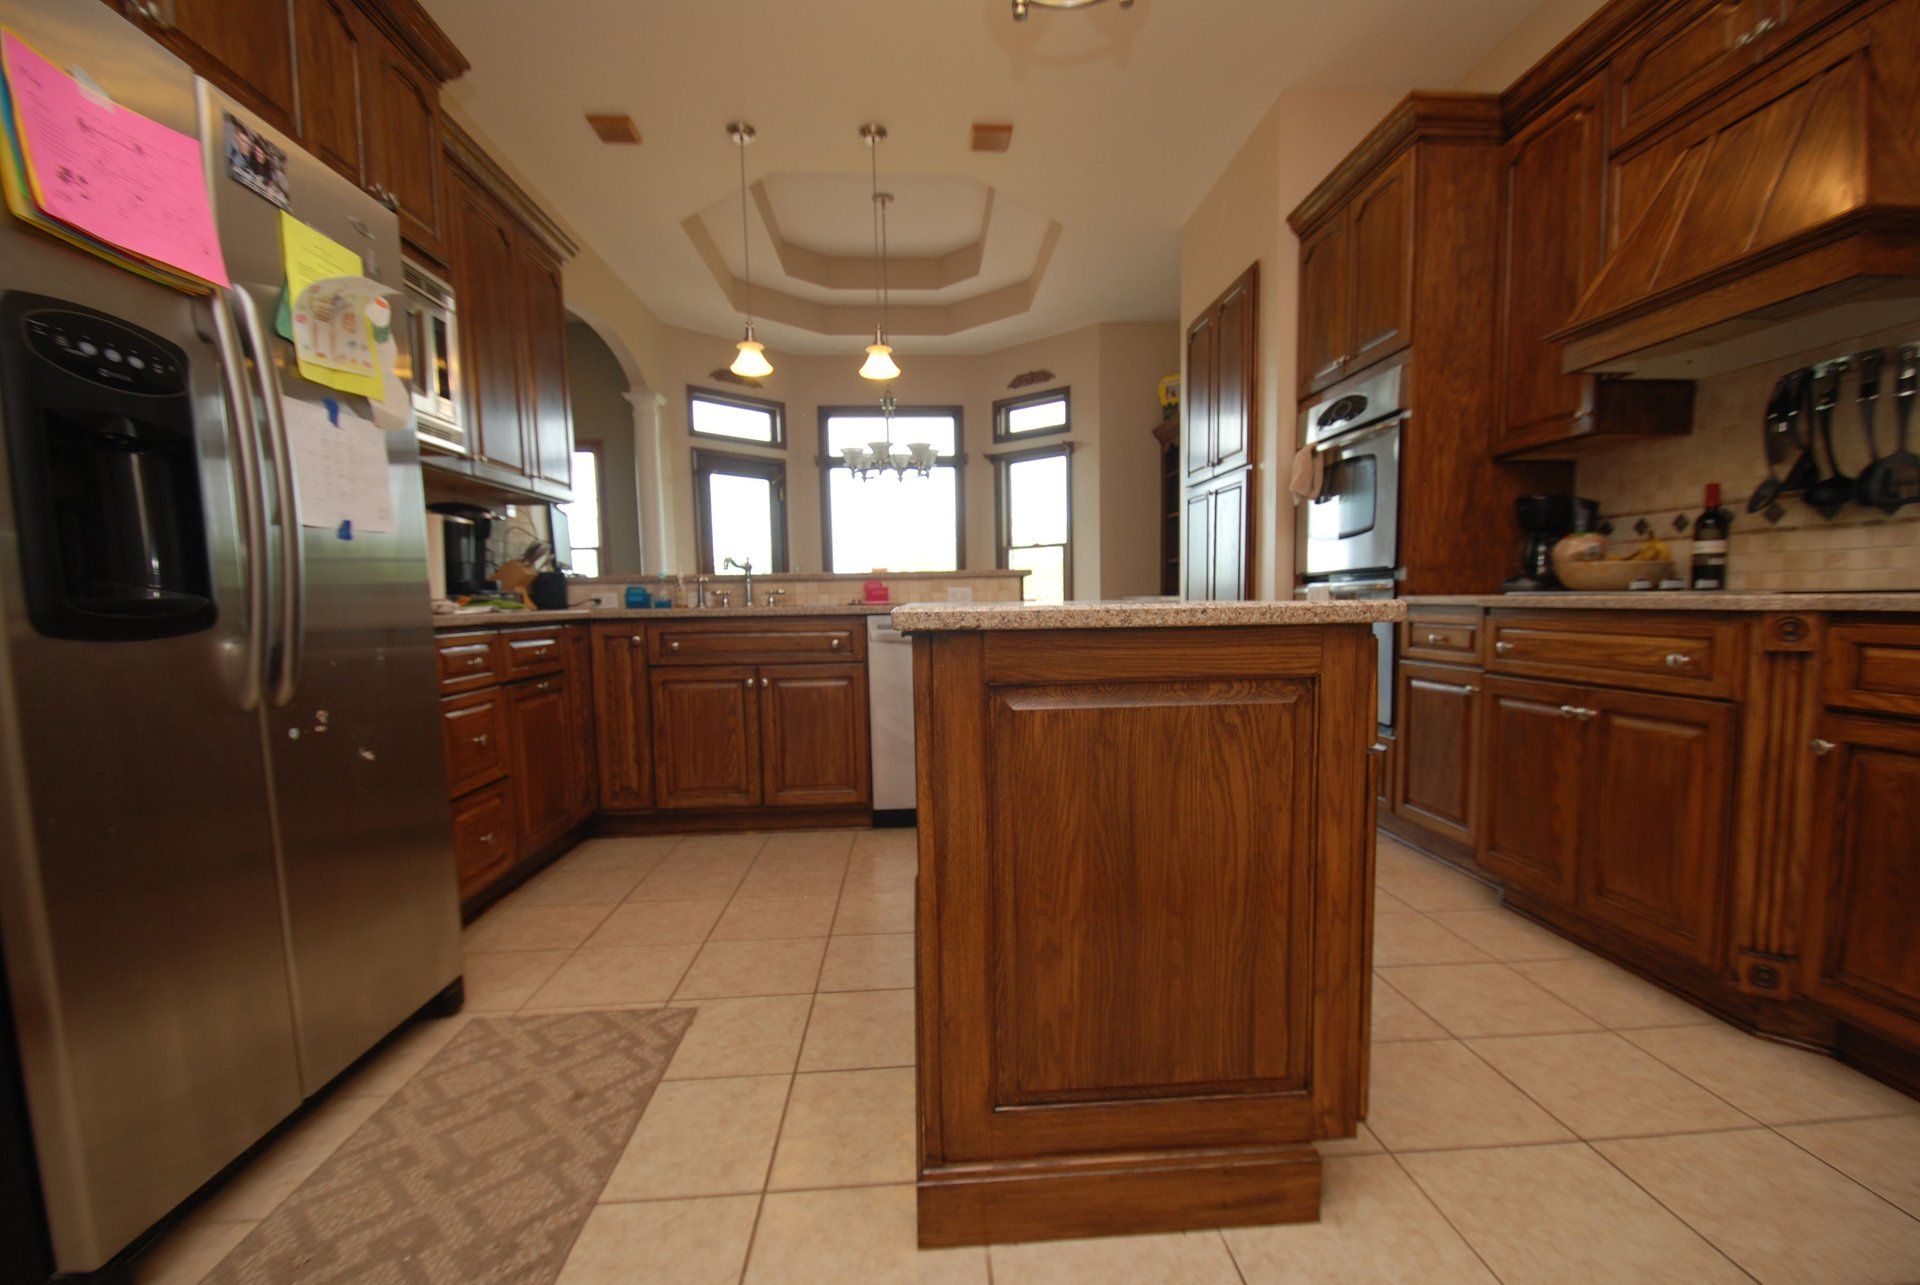 Canyon Country walnut stained cabinets